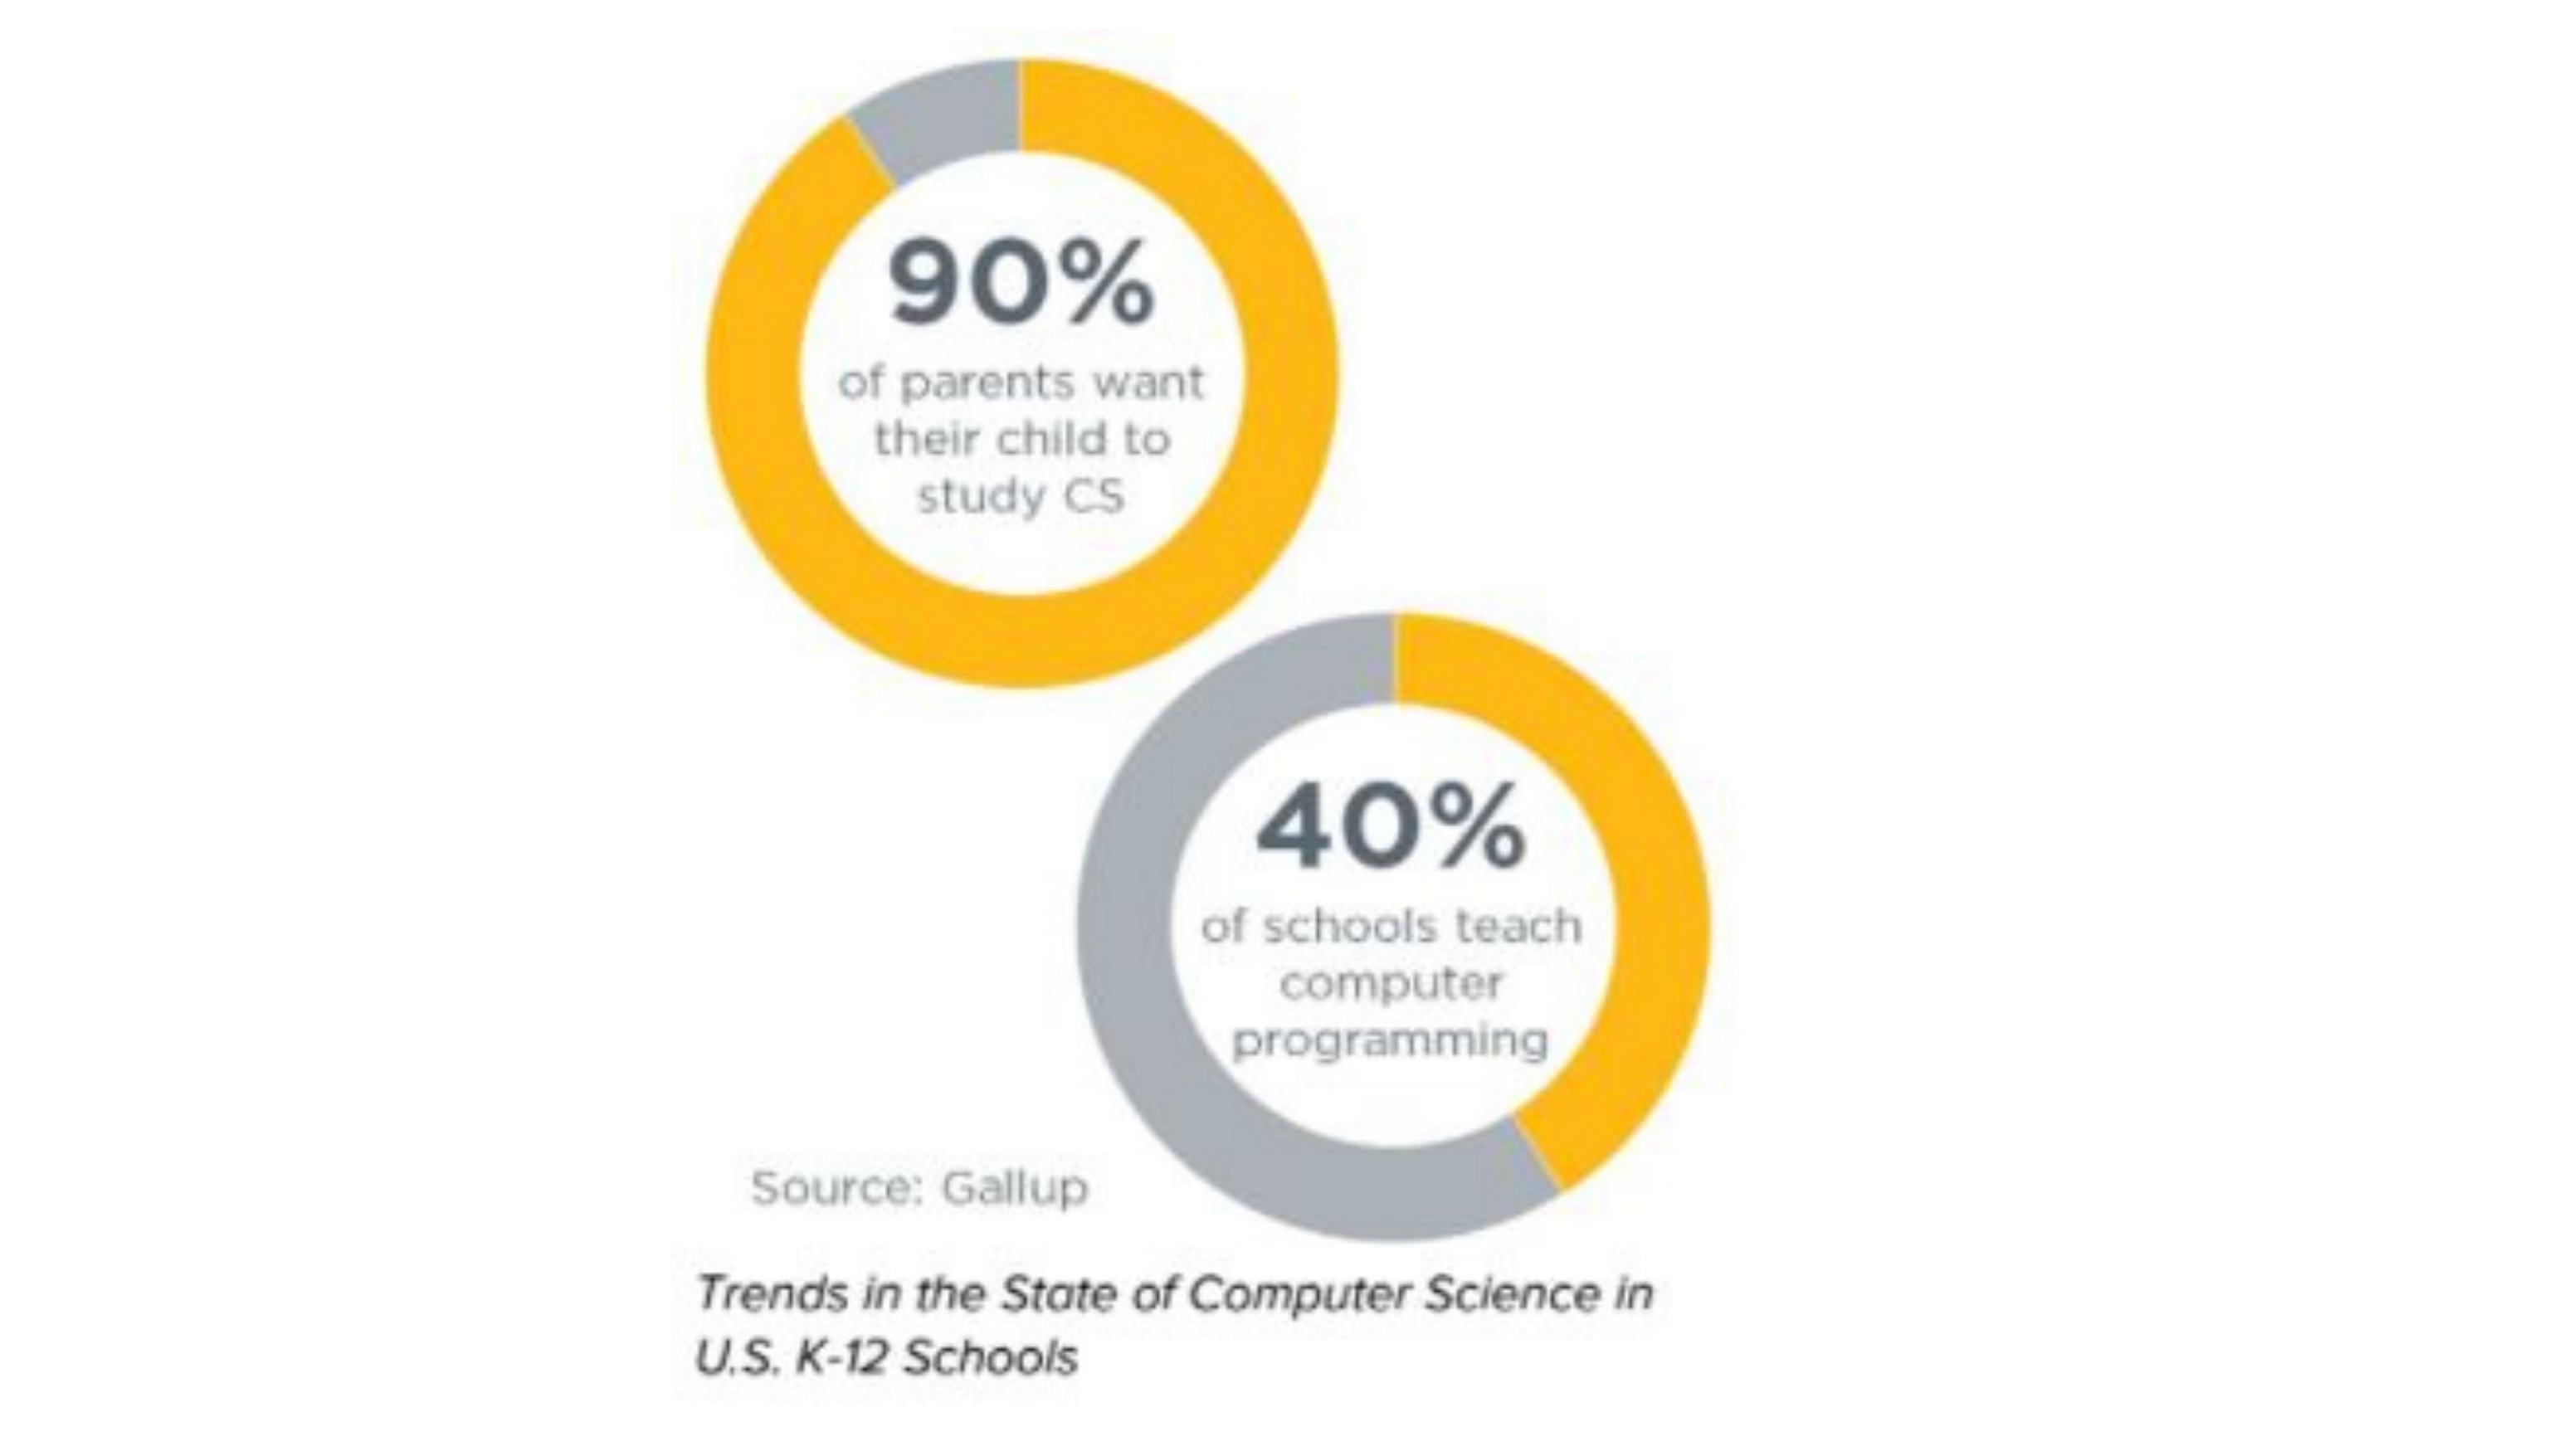 Trends in the State of Computer Science in U.S. K-12 Schools